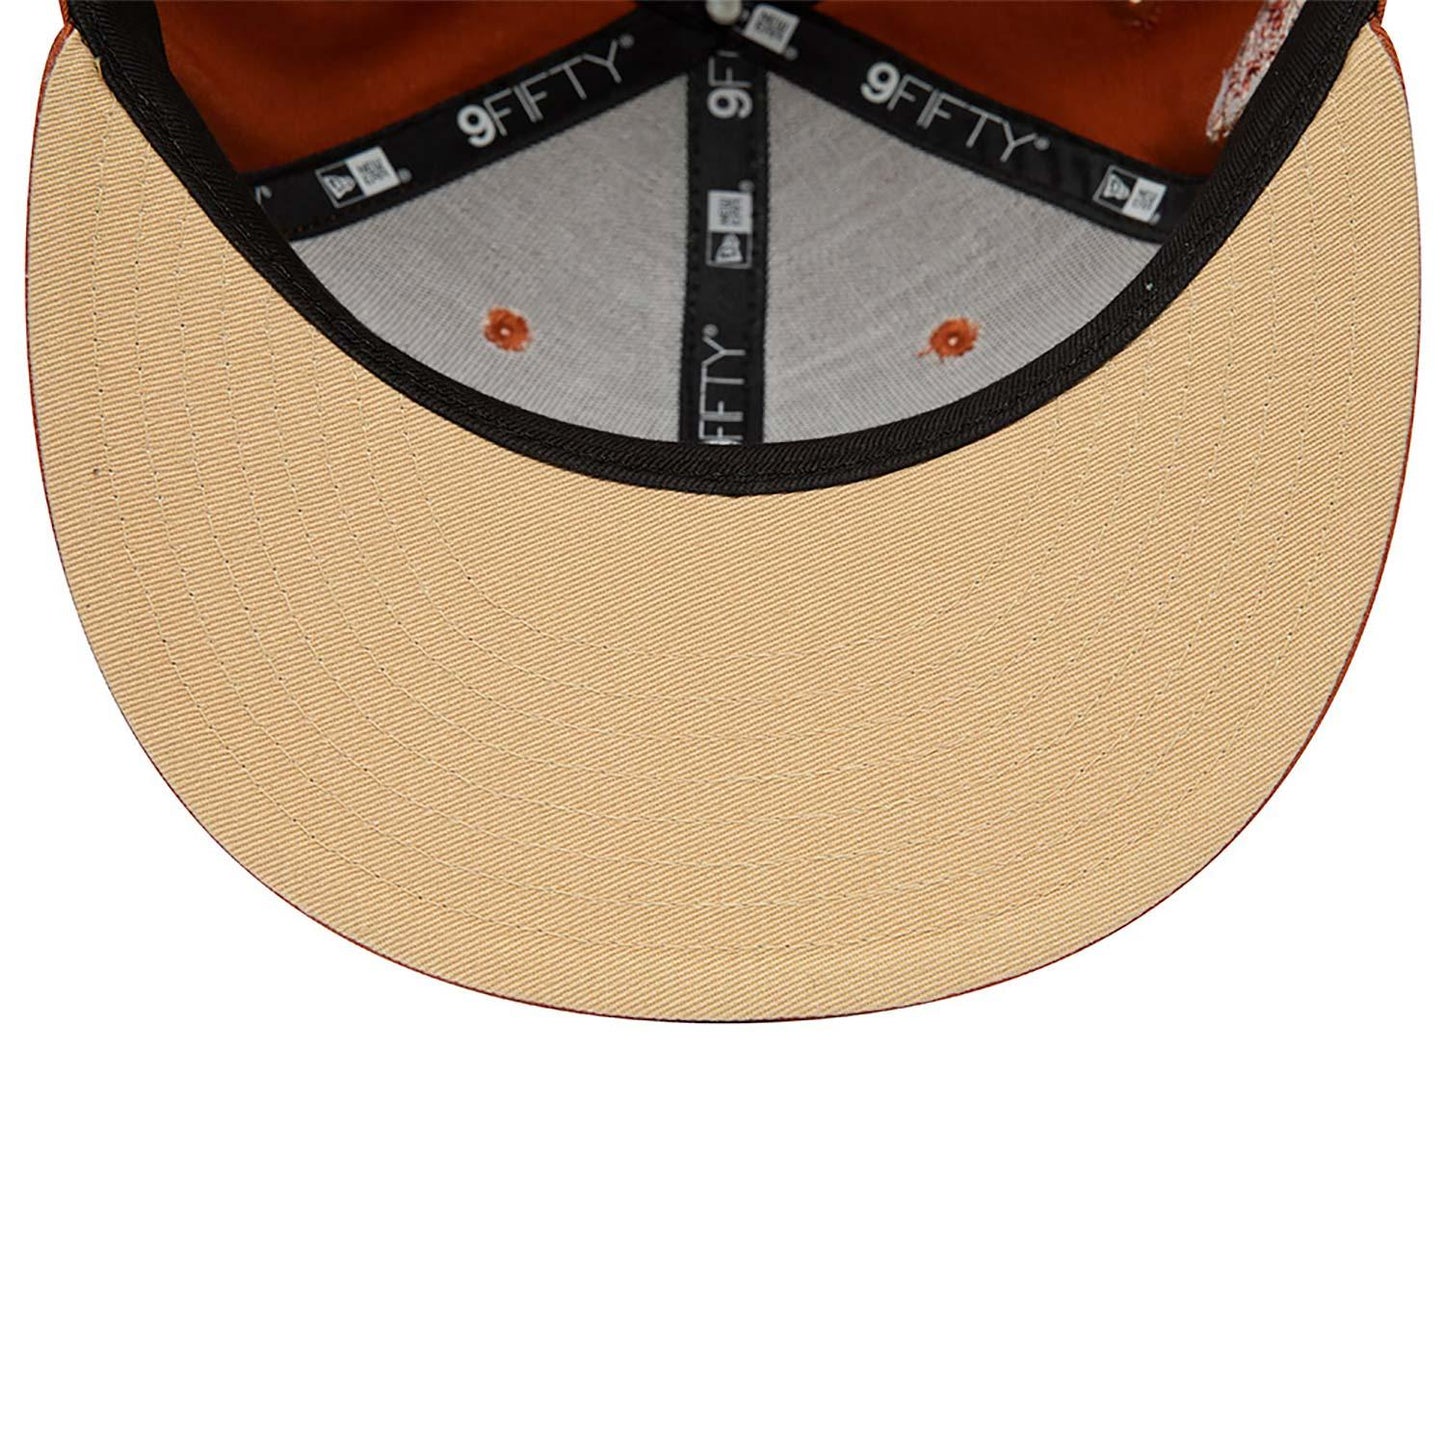 NEW ERA 9FIFTY SIDE PATCH DETROIT TIGERS RUST SNAPBACK